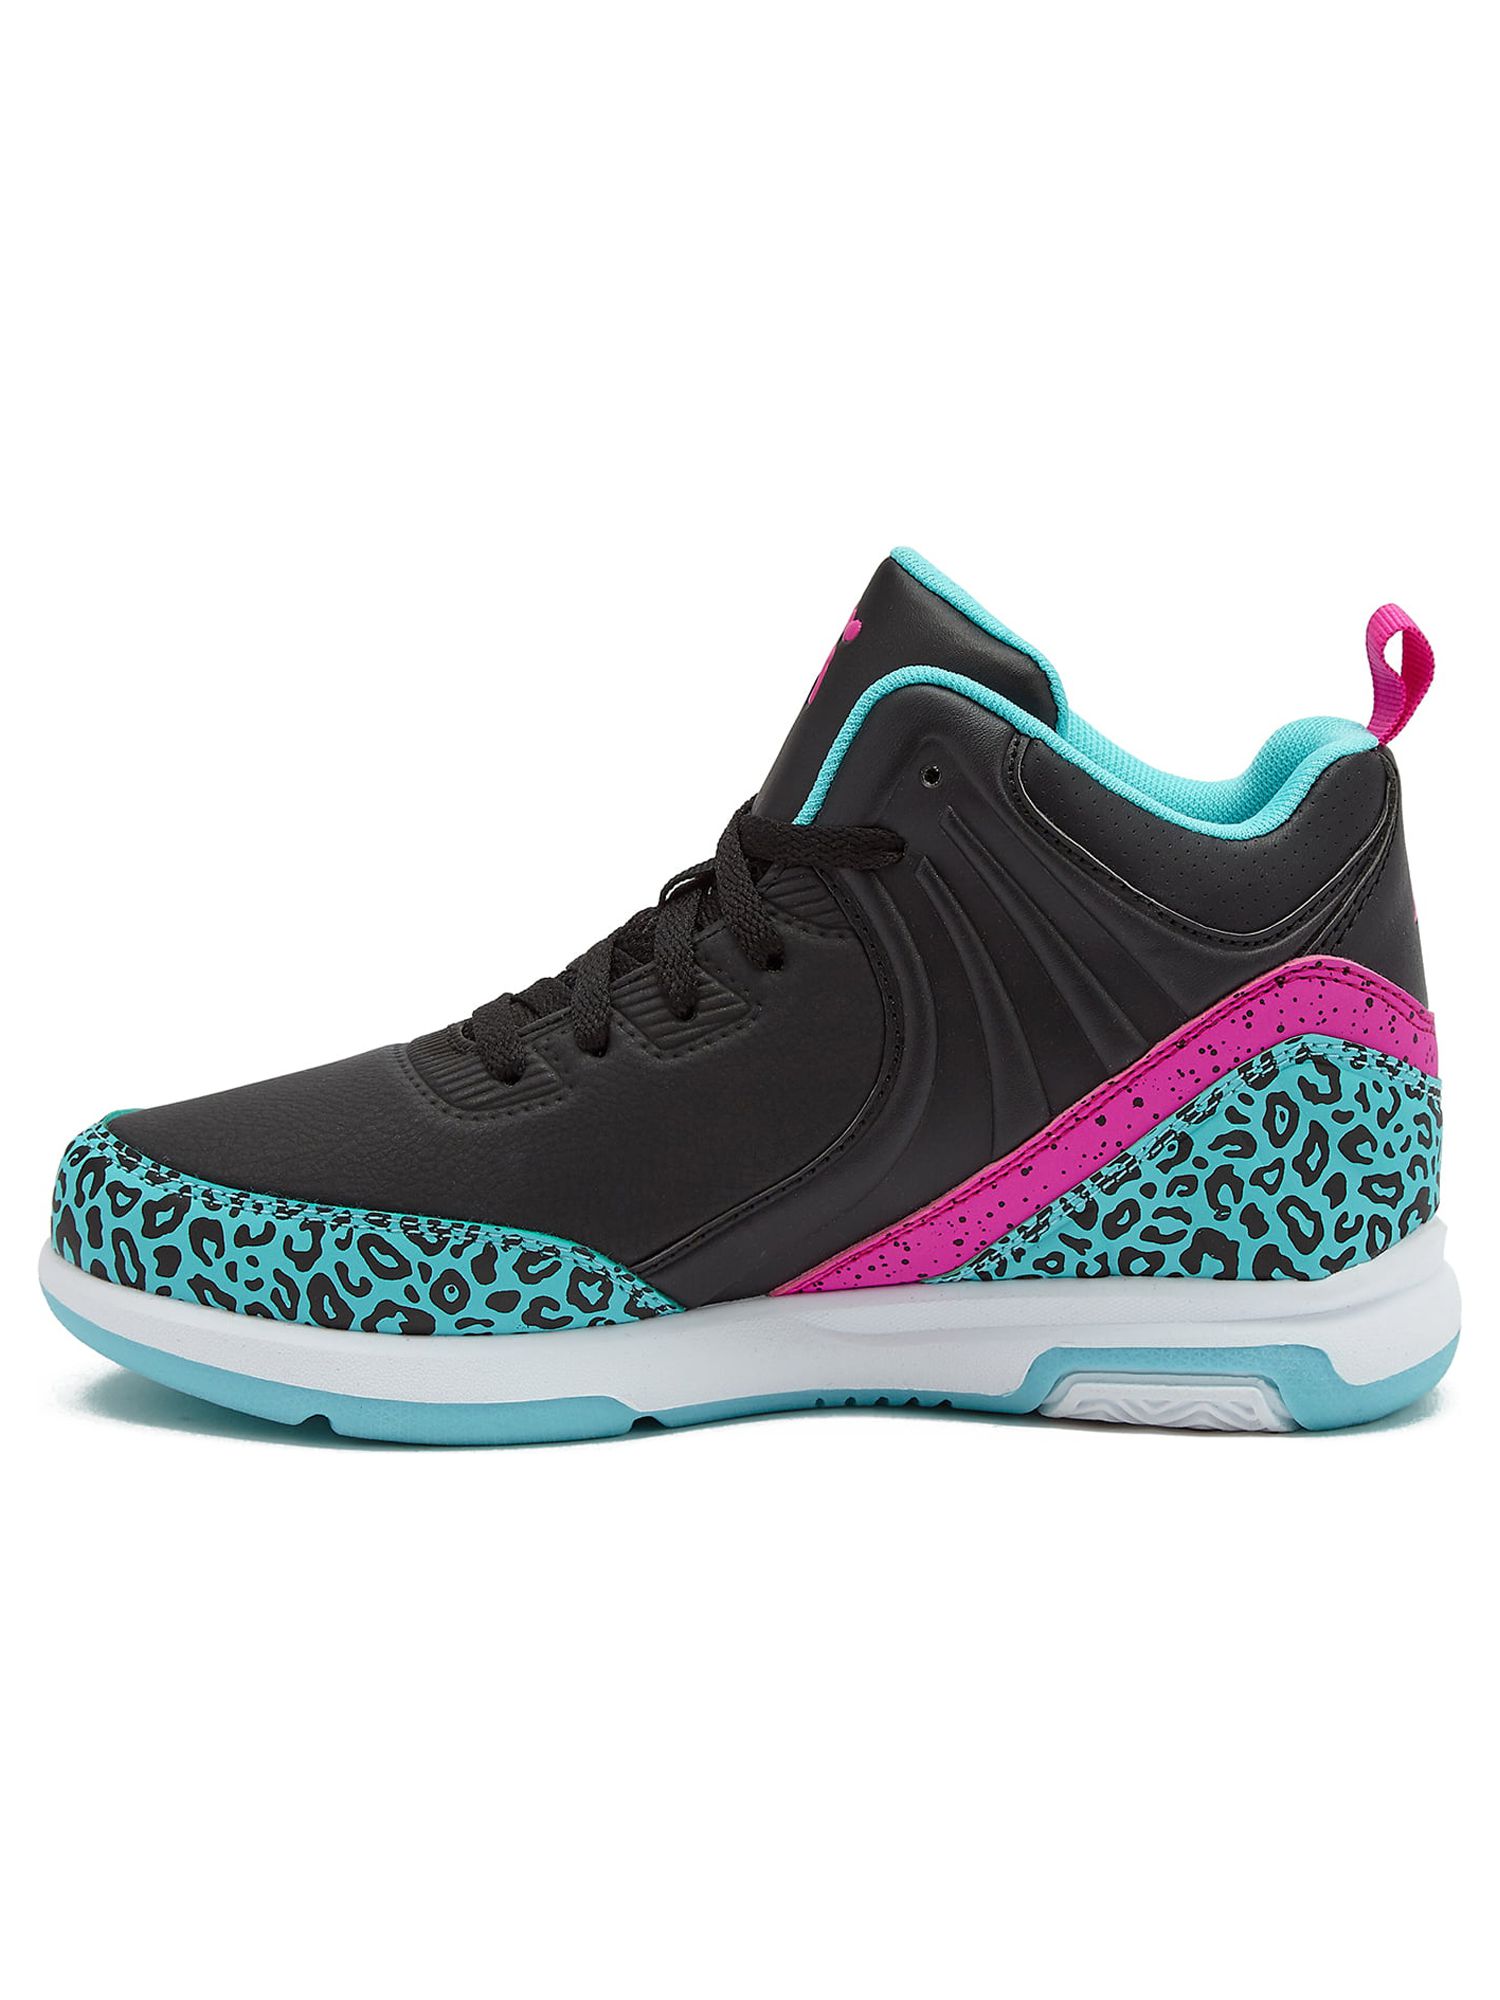 AND1 Little & Big Girl Athletic Fierce Basketball Sneaker, Sizes 13-6 - image 2 of 5